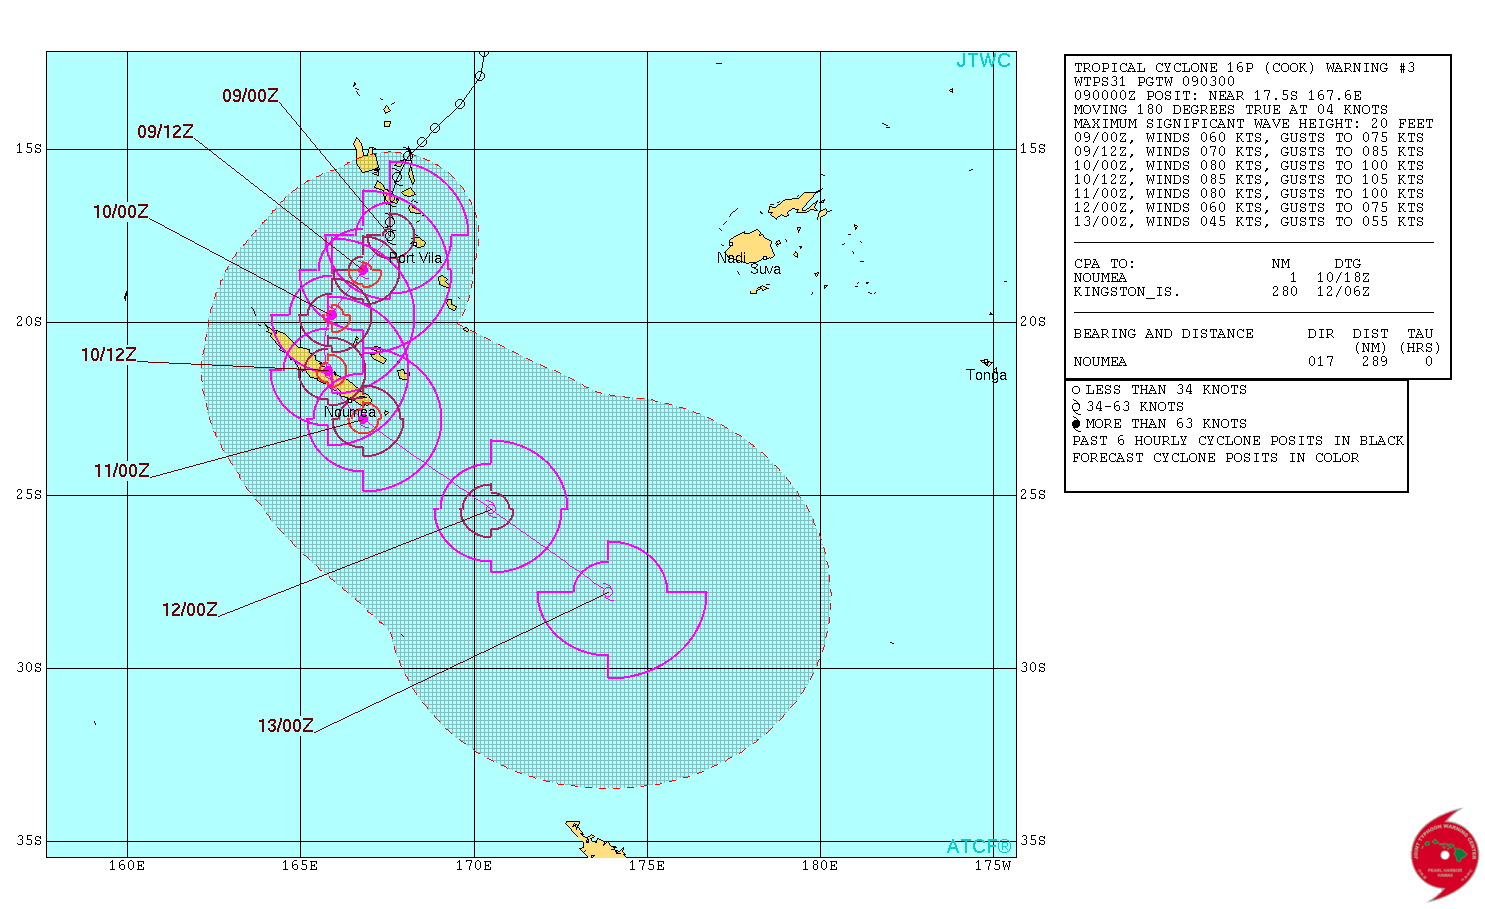 Tropical Cyclone Cook forecast track by JTWC on April 9, 2017